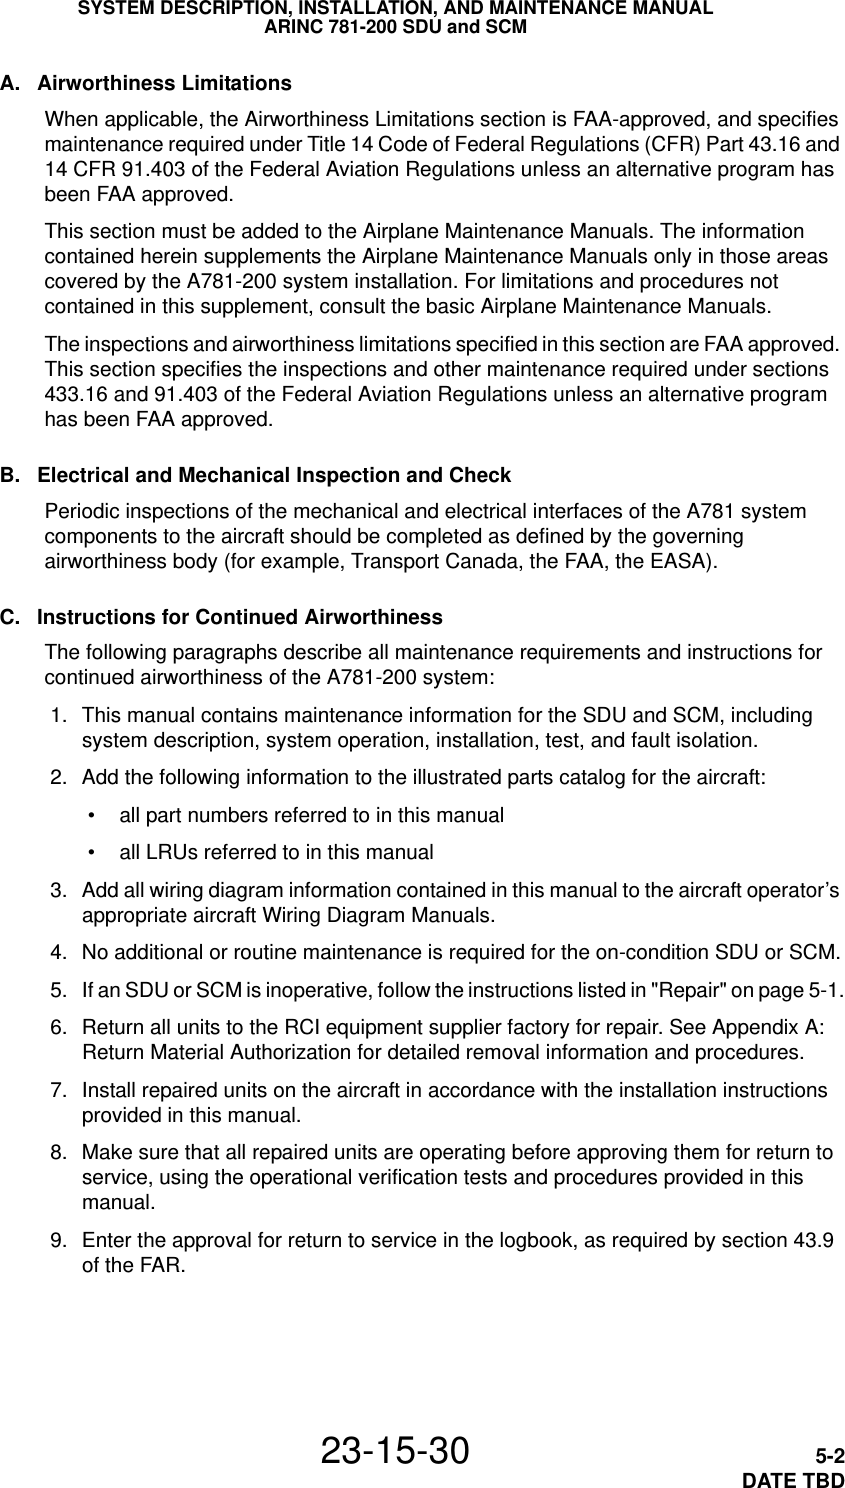 SYSTEM DESCRIPTION, INSTALLATION, AND MAINTENANCE MANUALARINC 781-200 SDU and SCM23-15-30 5-2DATE TBDA. Airworthiness LimitationsWhen applicable, the Airworthiness Limitations section is FAA-approved, and specifies maintenance required under Title 14 Code of Federal Regulations (CFR) Part 43.16 and 14 CFR 91.403 of the Federal Aviation Regulations unless an alternative program has been FAA approved.This section must be added to the Airplane Maintenance Manuals. The information contained herein supplements the Airplane Maintenance Manuals only in those areas covered by the A781-200 system installation. For limitations and procedures not contained in this supplement, consult the basic Airplane Maintenance Manuals.The inspections and airworthiness limitations specified in this section are FAA approved. This section specifies the inspections and other maintenance required under sections 433.16 and 91.403 of the Federal Aviation Regulations unless an alternative program has been FAA approved.B. Electrical and Mechanical Inspection and CheckPeriodic inspections of the mechanical and electrical interfaces of the A781 system components to the aircraft should be completed as defined by the governing airworthiness body (for example, Transport Canada, the FAA, the EASA). C. Instructions for Continued AirworthinessThe following paragraphs describe all maintenance requirements and instructions for continued airworthiness of the A781-200 system: 1. This manual contains maintenance information for the SDU and SCM, including system description, system operation, installation, test, and fault isolation. 2. Add the following information to the illustrated parts catalog for the aircraft: • all part numbers referred to in this manual • all LRUs referred to in this manual 3. Add all wiring diagram information contained in this manual to the aircraft operator’s appropriate aircraft Wiring Diagram Manuals. 4. No additional or routine maintenance is required for the on-condition SDU or SCM. 5. If an SDU or SCM is inoperative, follow the instructions listed in &quot;Repair&quot; on page 5-1. 6. Return all units to the RCI equipment supplier factory for repair. See Appendix A: Return Material Authorization for detailed removal information and procedures. 7. Install repaired units on the aircraft in accordance with the installation instructions provided in this manual. 8. Make sure that all repaired units are operating before approving them for return to service, using the operational verification tests and procedures provided in this manual.  9. Enter the approval for return to service in the logbook, as required by section 43.9 of the FAR.